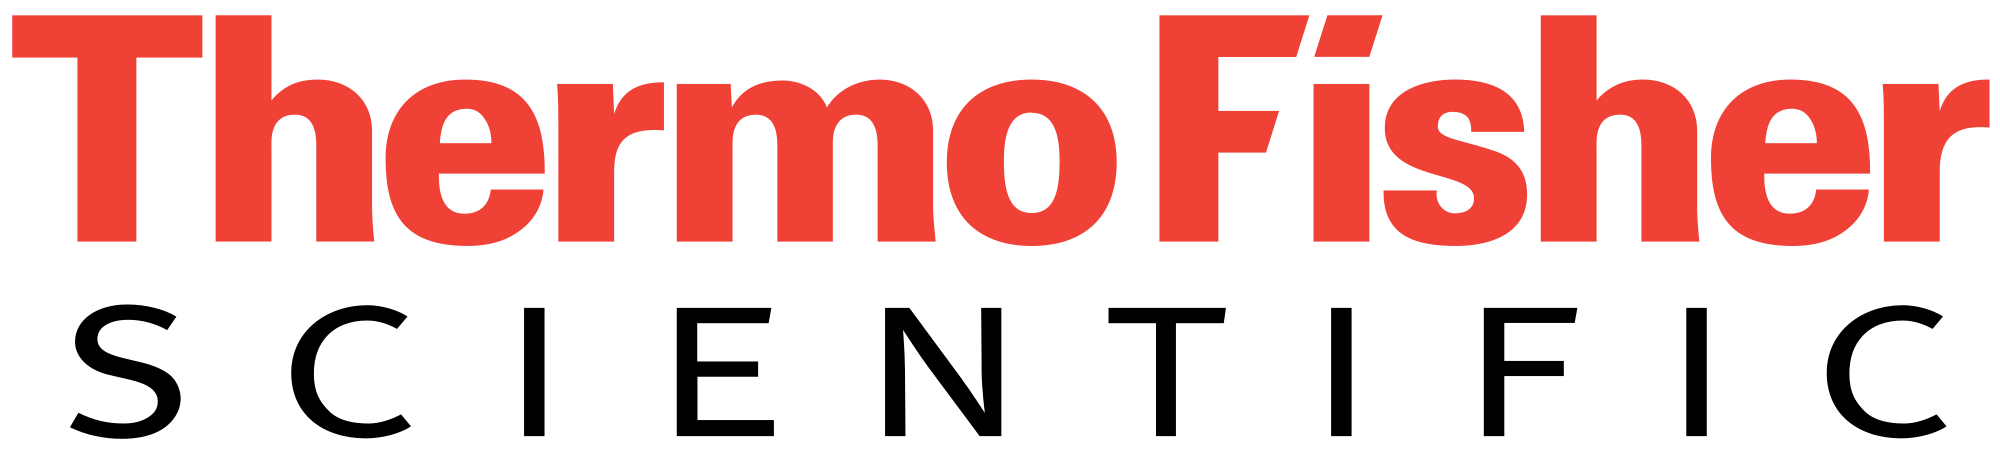 Thermo_Fisher_Logo